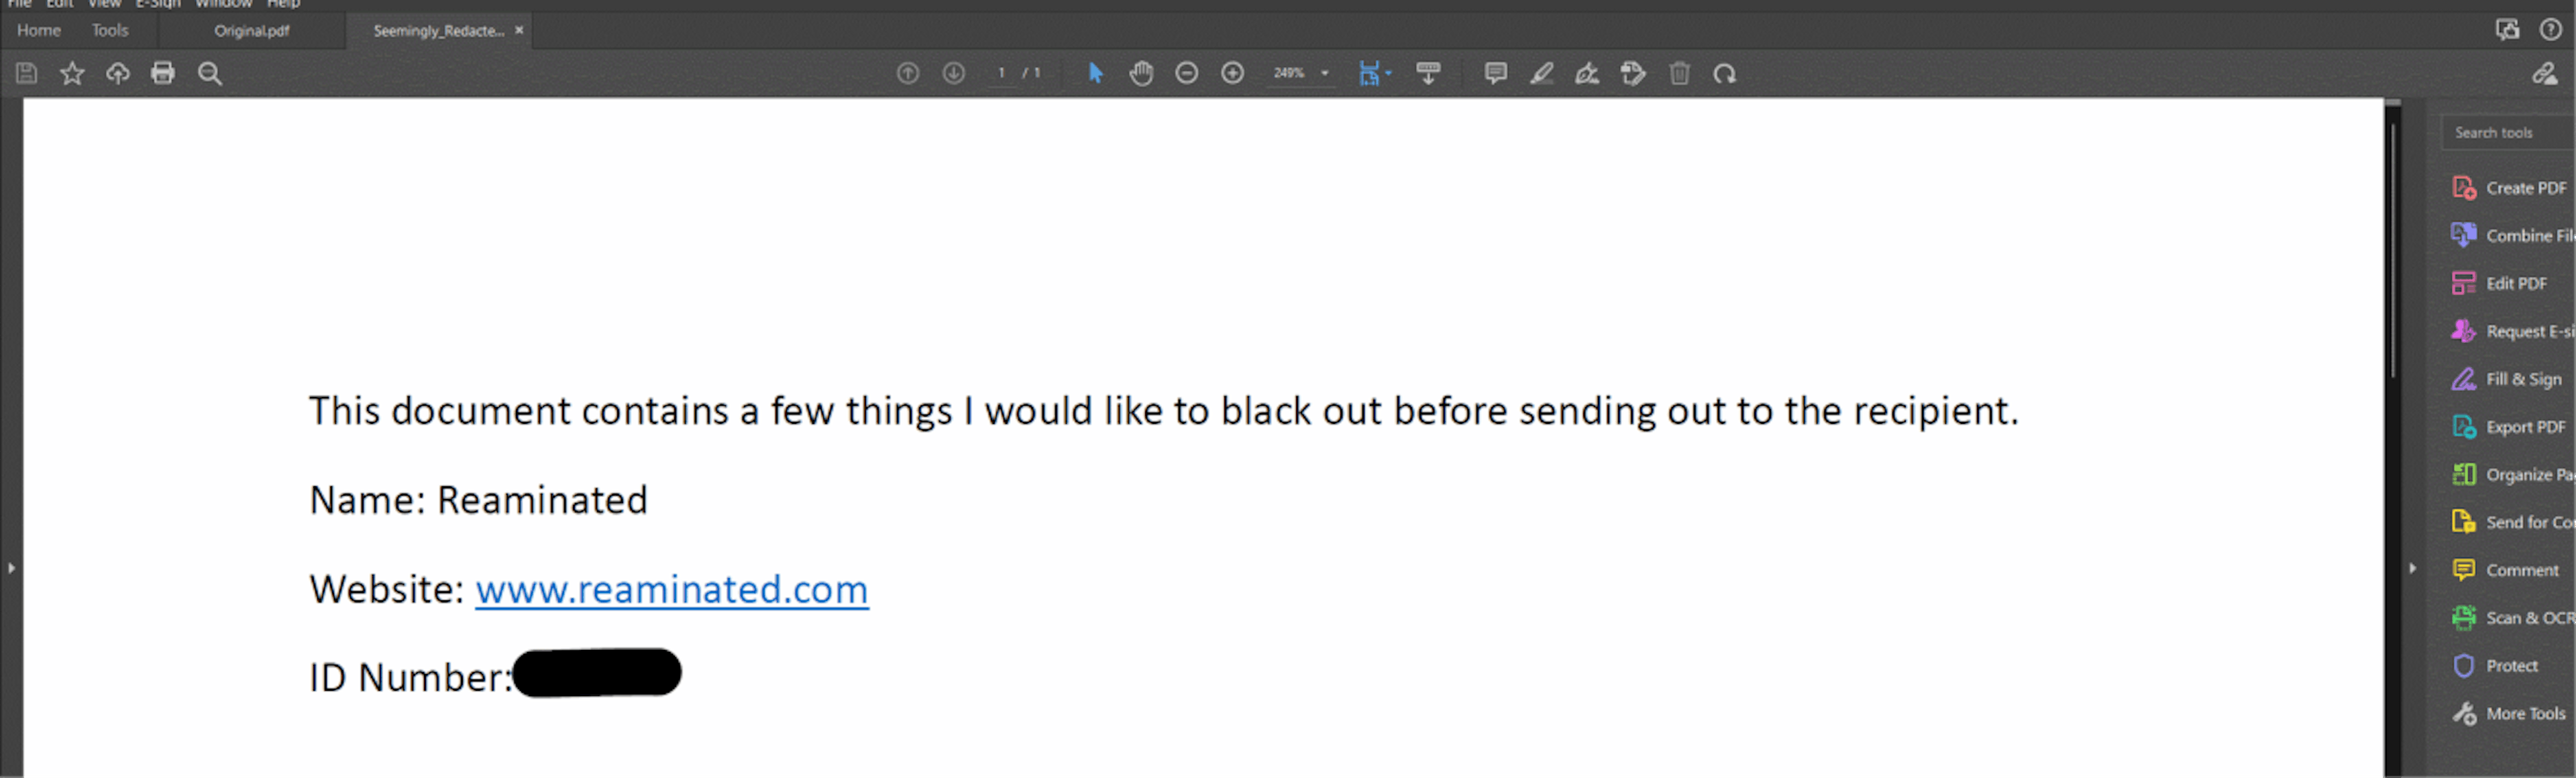 After saving the file as “Seemingly_Redacted.pdf”, and opening it in Acrobat, a user can easily remove the line to expose the text that should be hidden